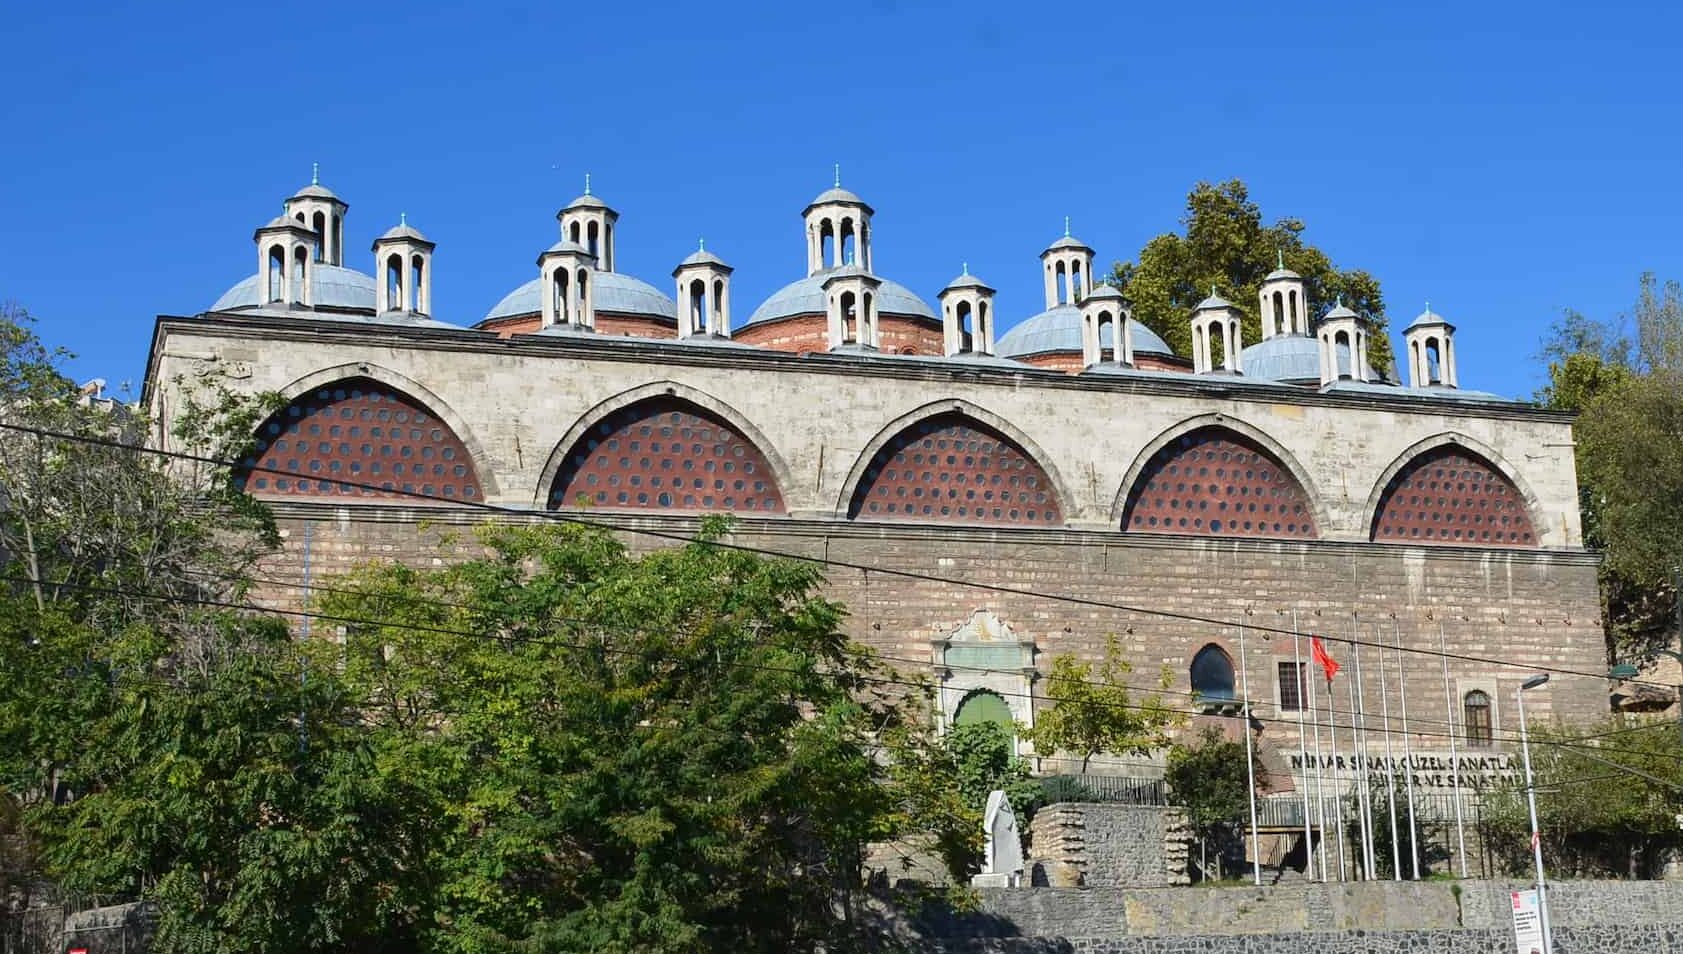 Five Domes building of the Tophane-i Amire Culture and Art Center in Tophane, Istanbul, Turkey